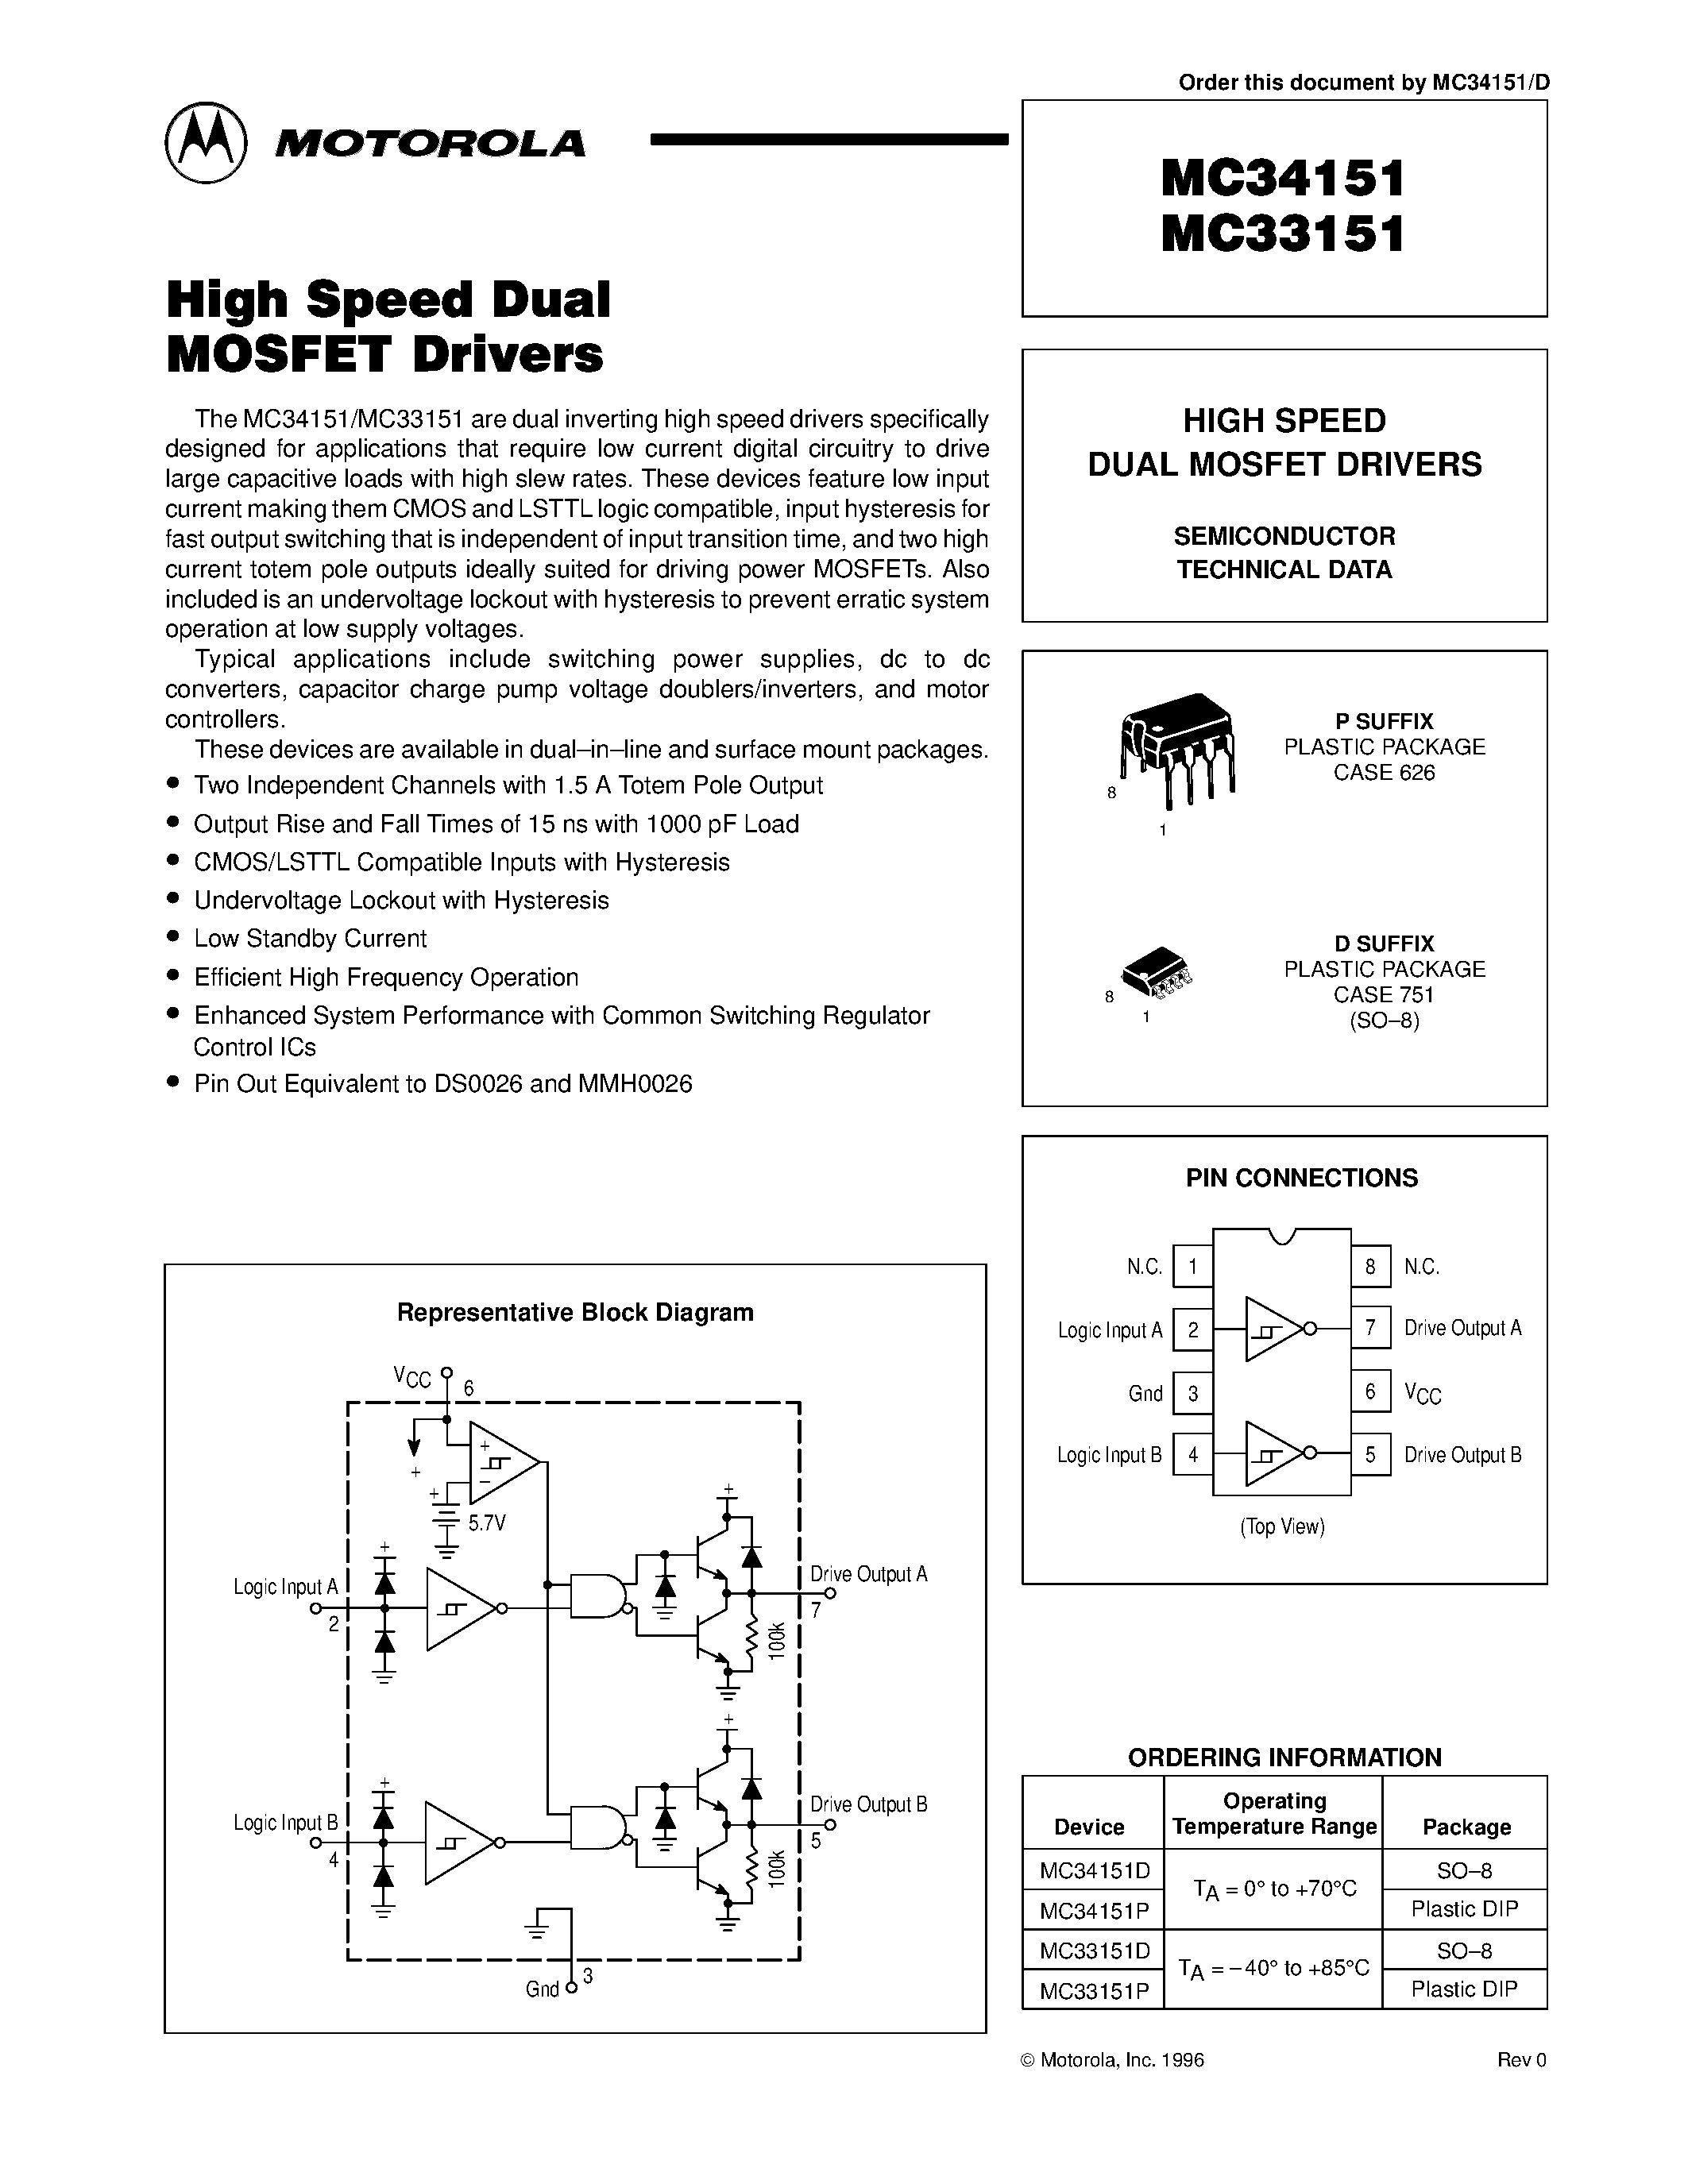 Datasheet MC33151 - HIGH SPEED DUAL MOSFET DRIVERS page 1